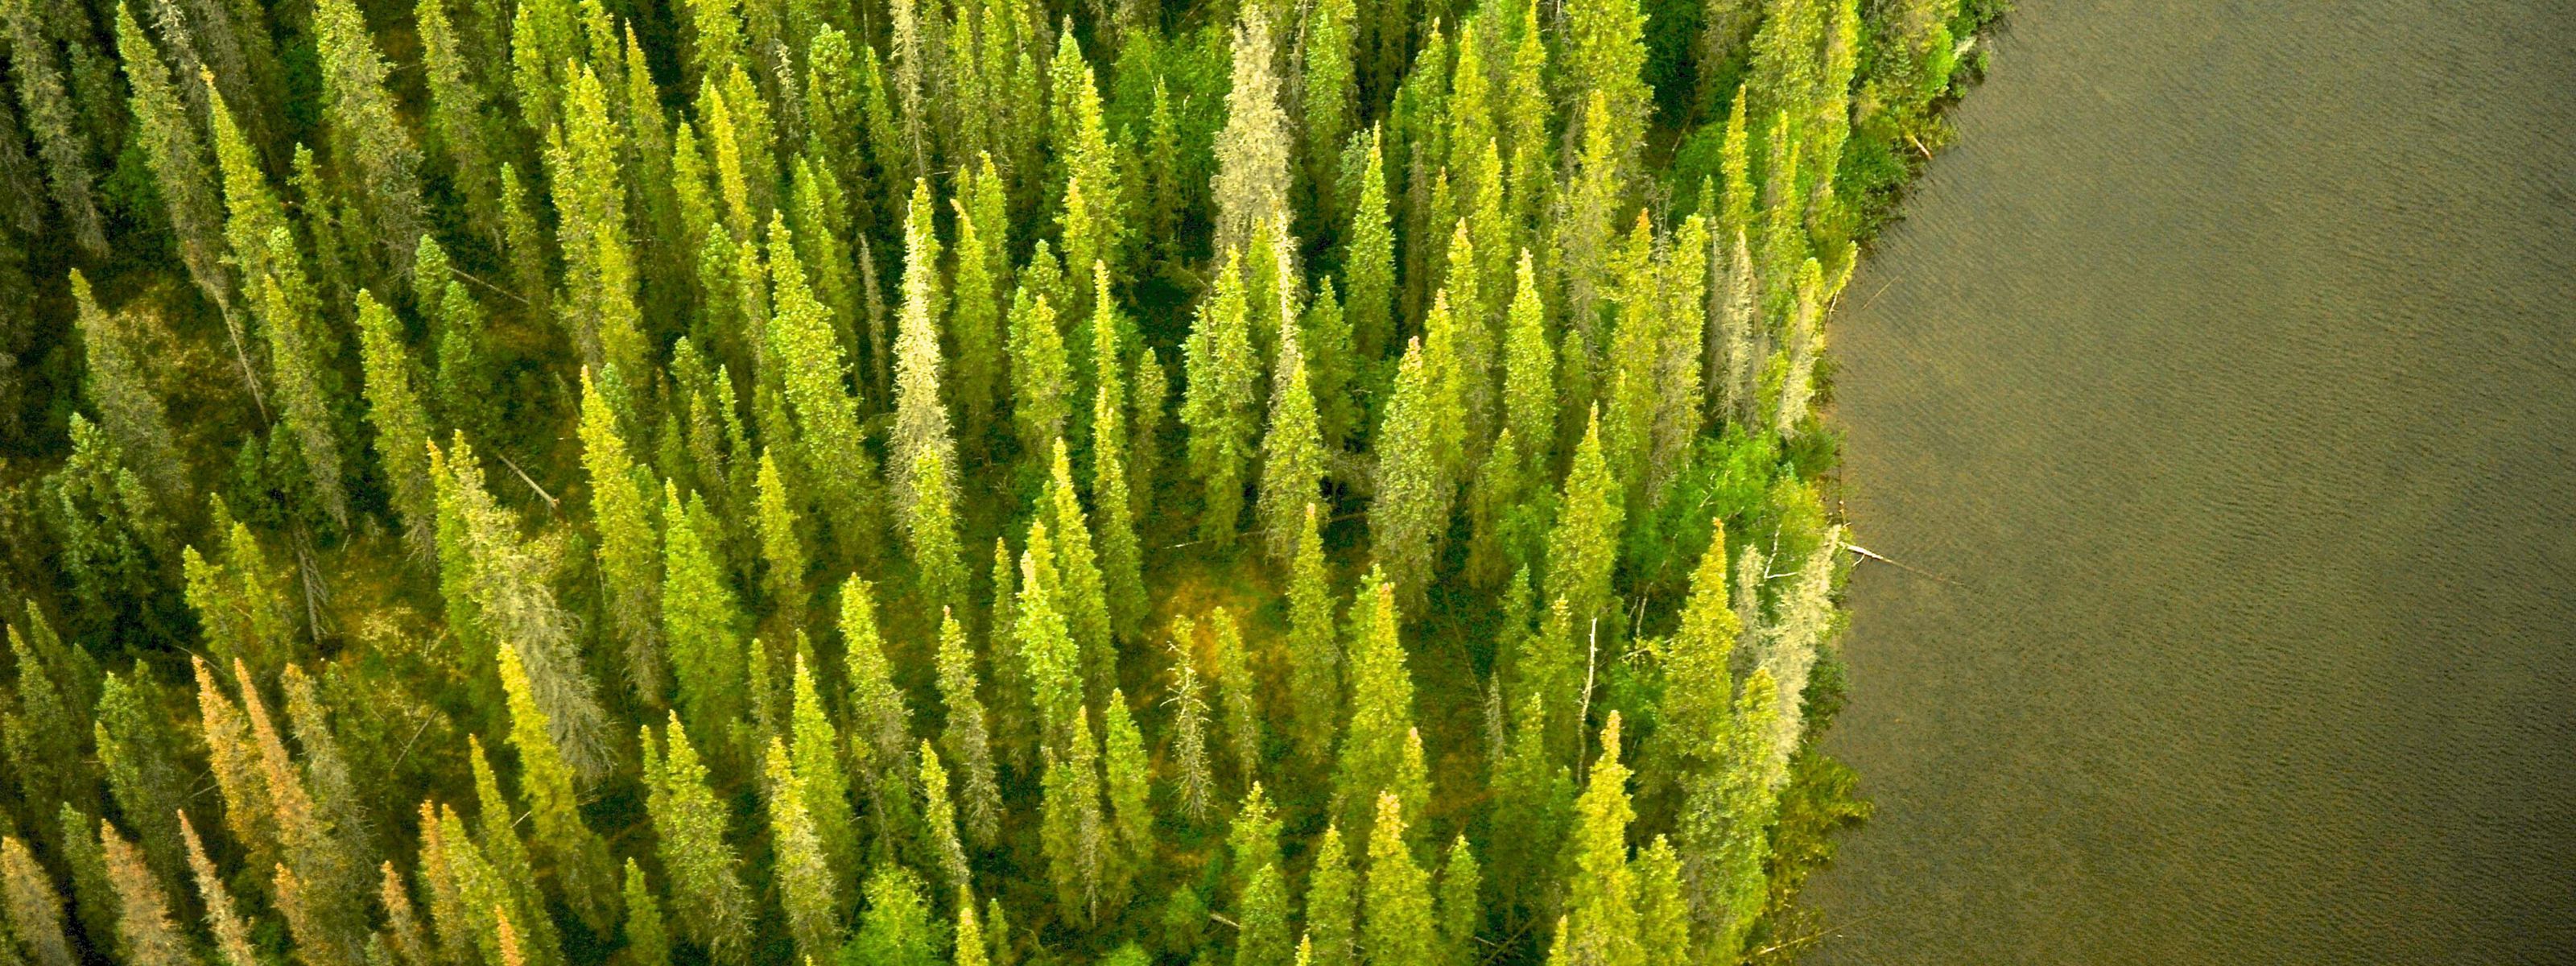 Aerial view of tall bright green trees next to a body of water.